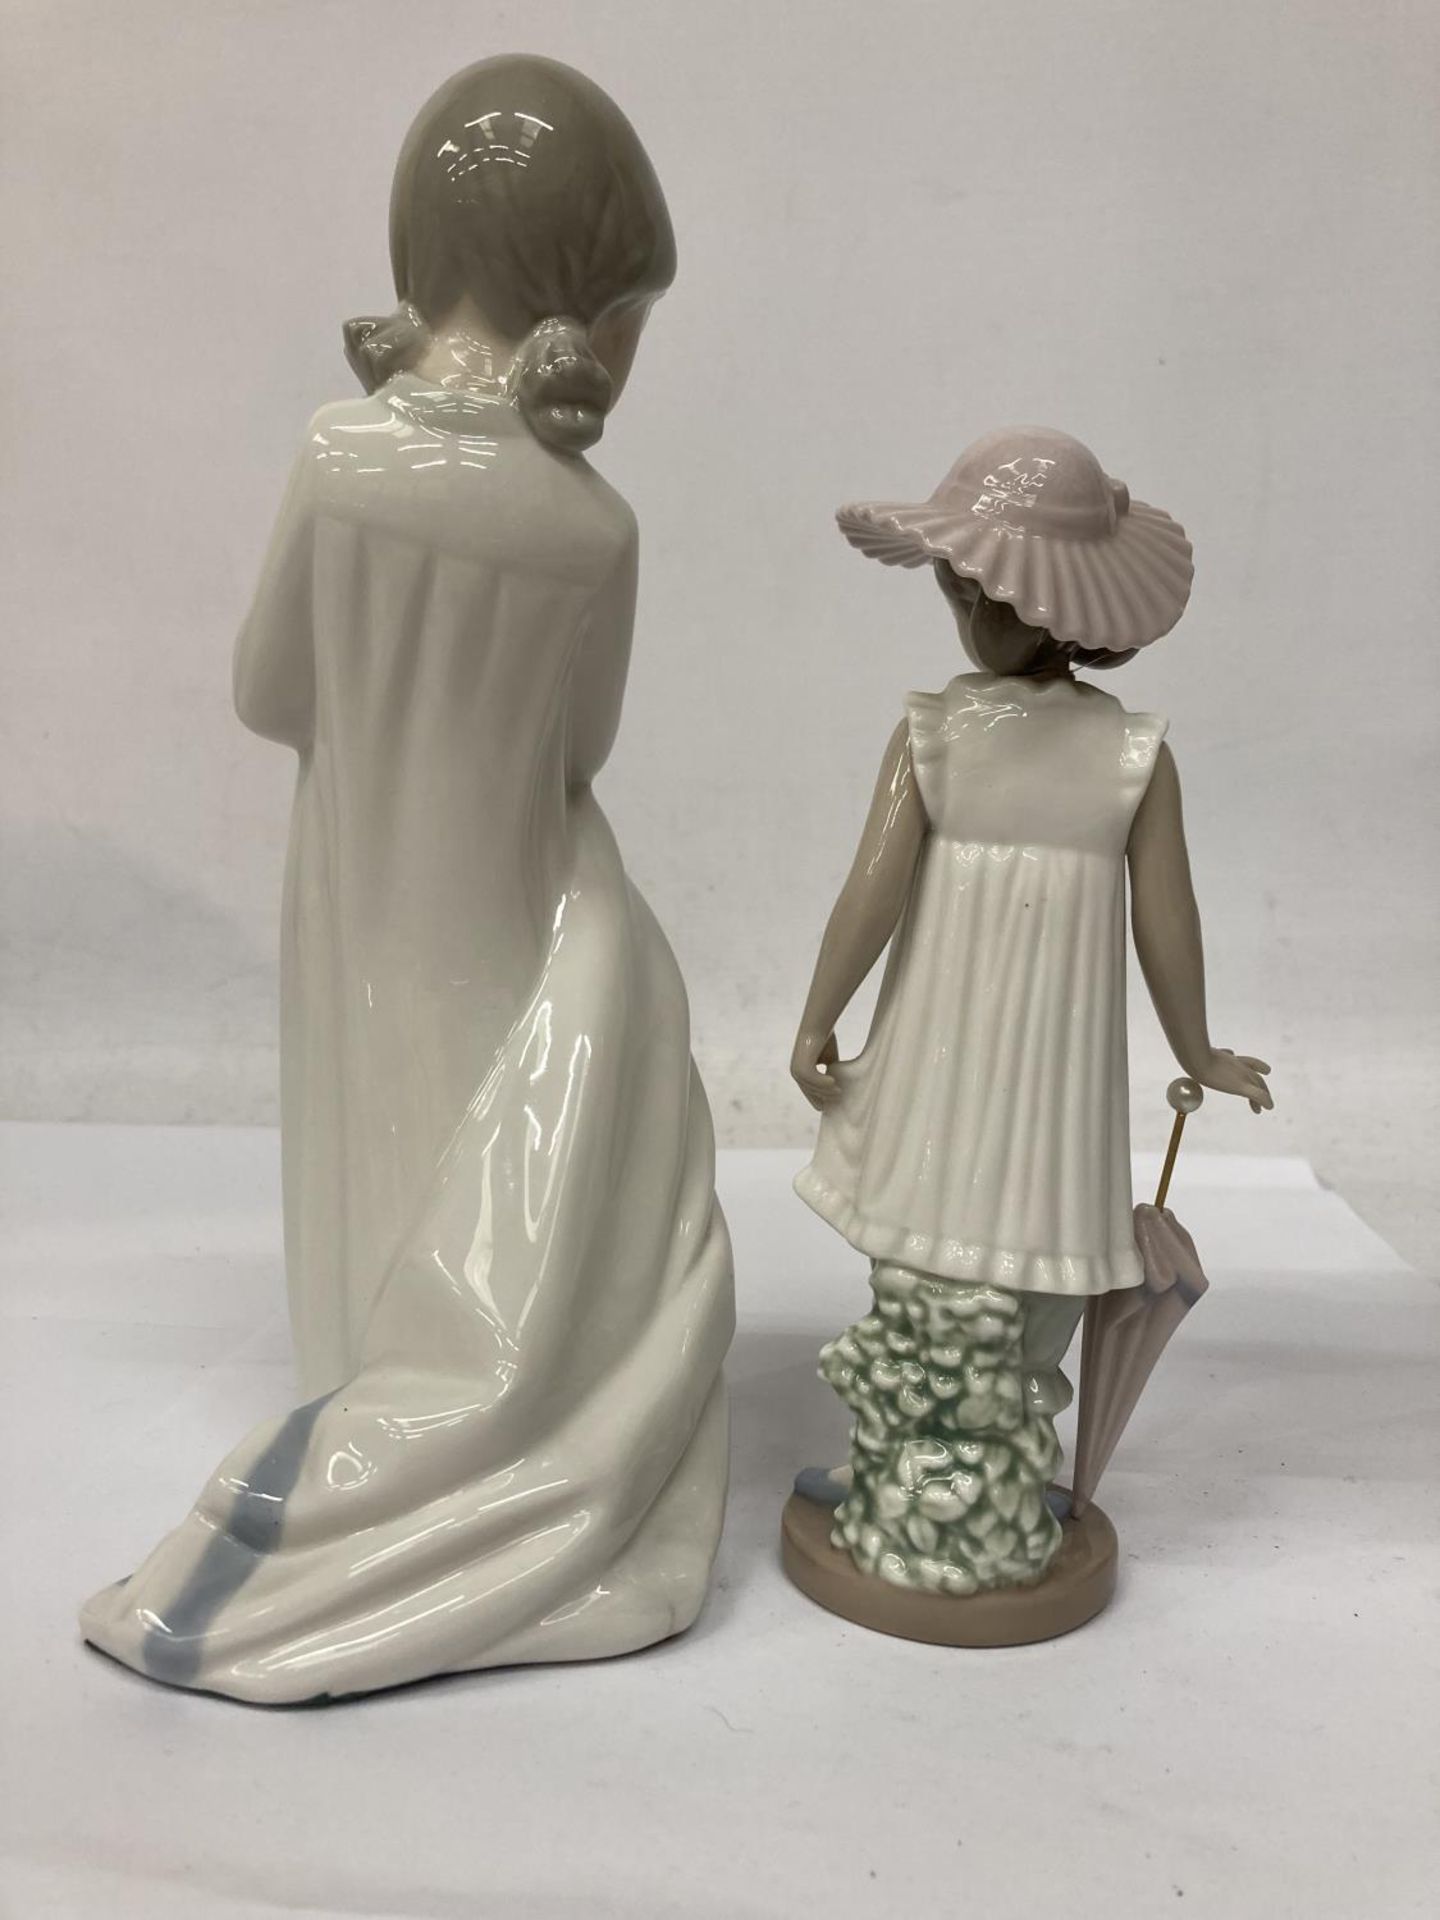 TWO NAO FIGURINES ONE HOLDING A BLANKET AND THE OTHER AN UMBRELLA - Image 2 of 7